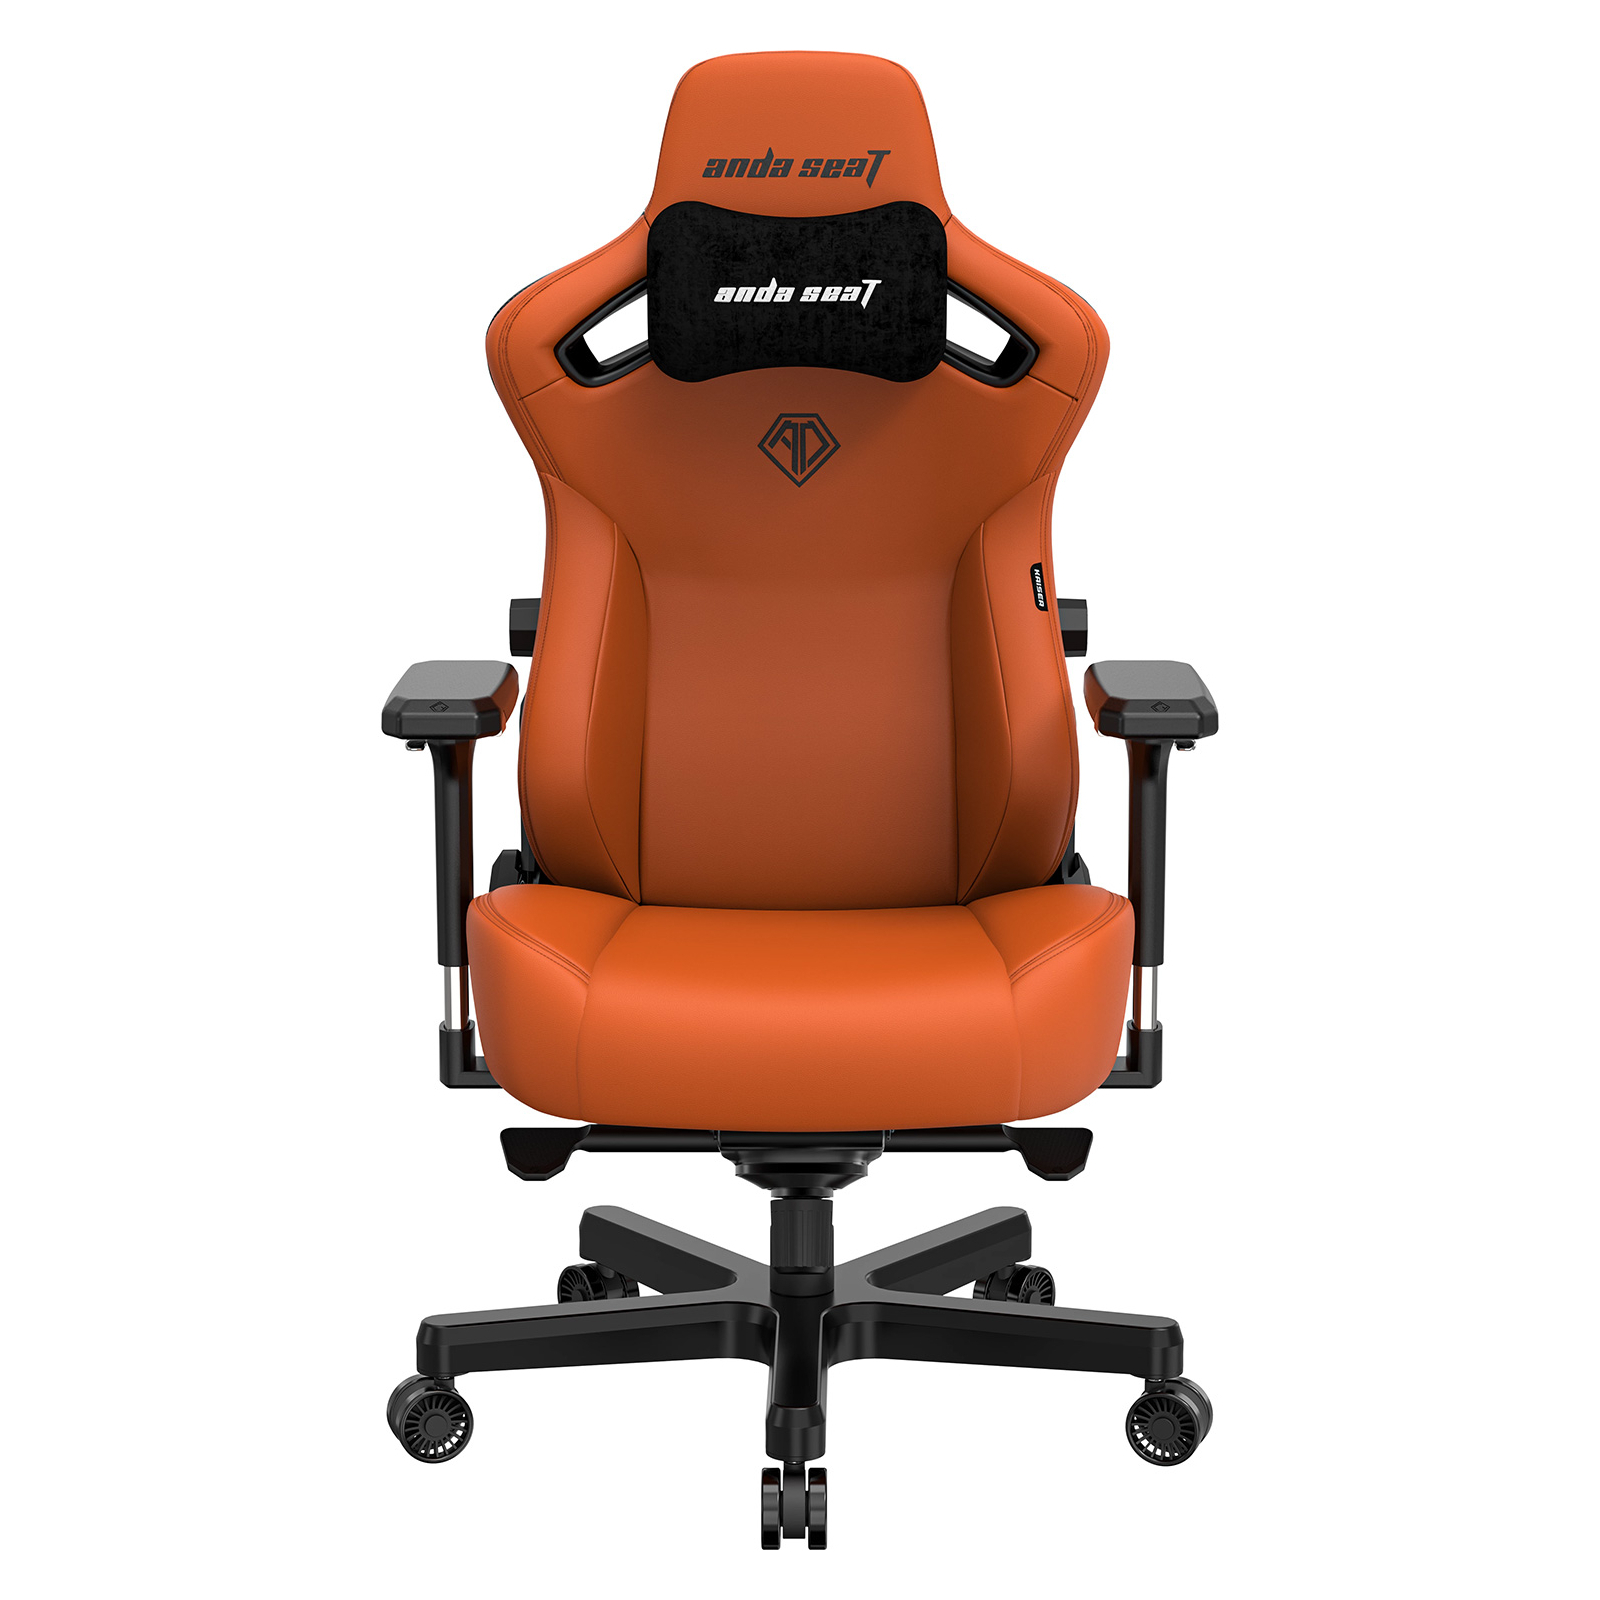 Кресло игровое Anda Seat Kaiser 3 Size L Maroon (AD12YDC-L-01-A-PV/C)